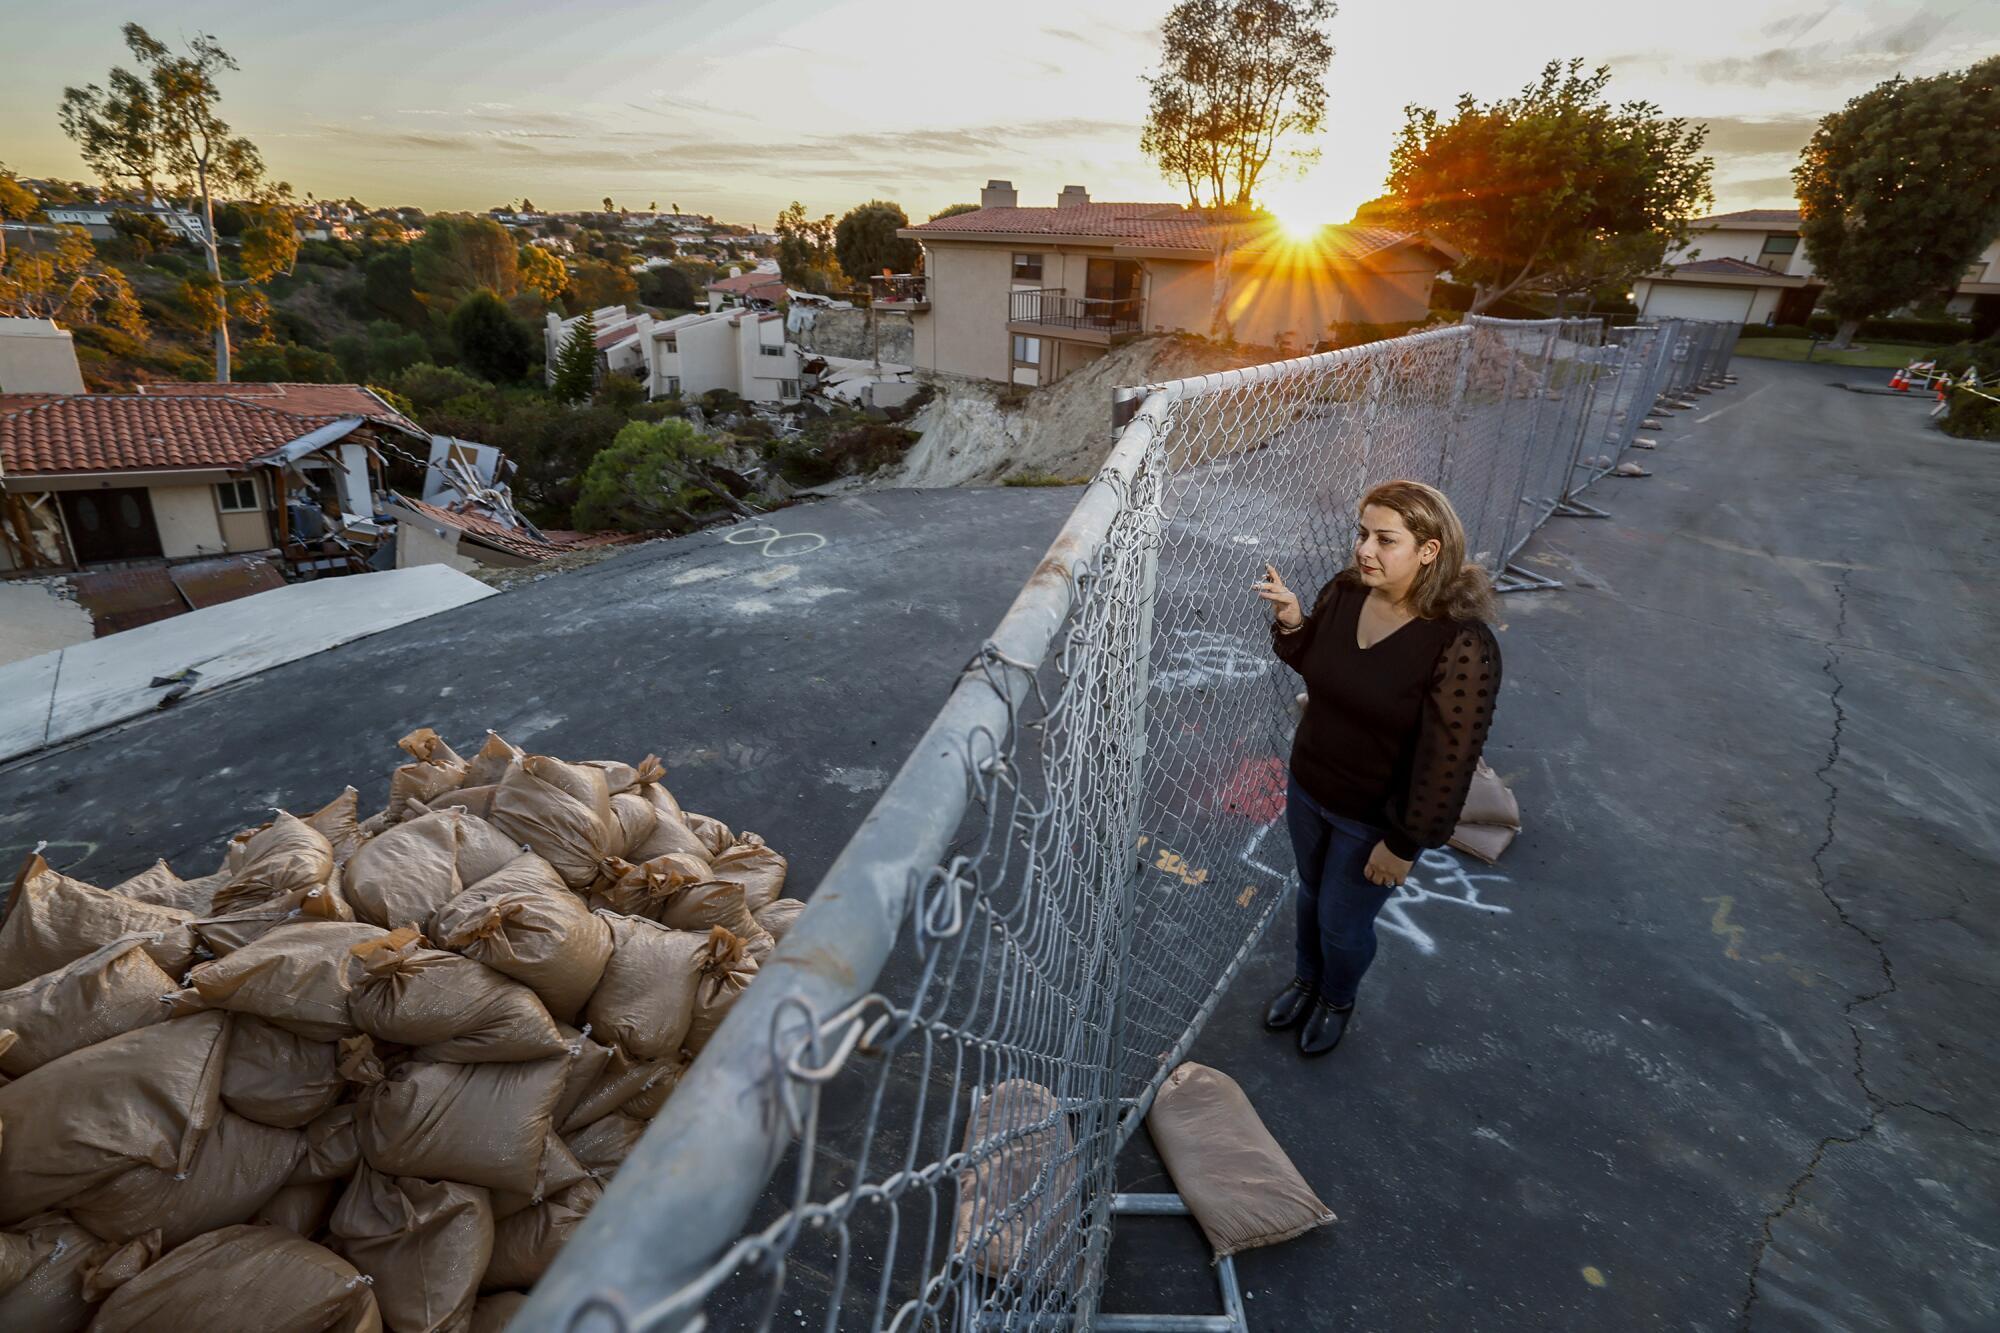 A woman stands next to a chain-link fence and sandbags, with damaged homes in the background.